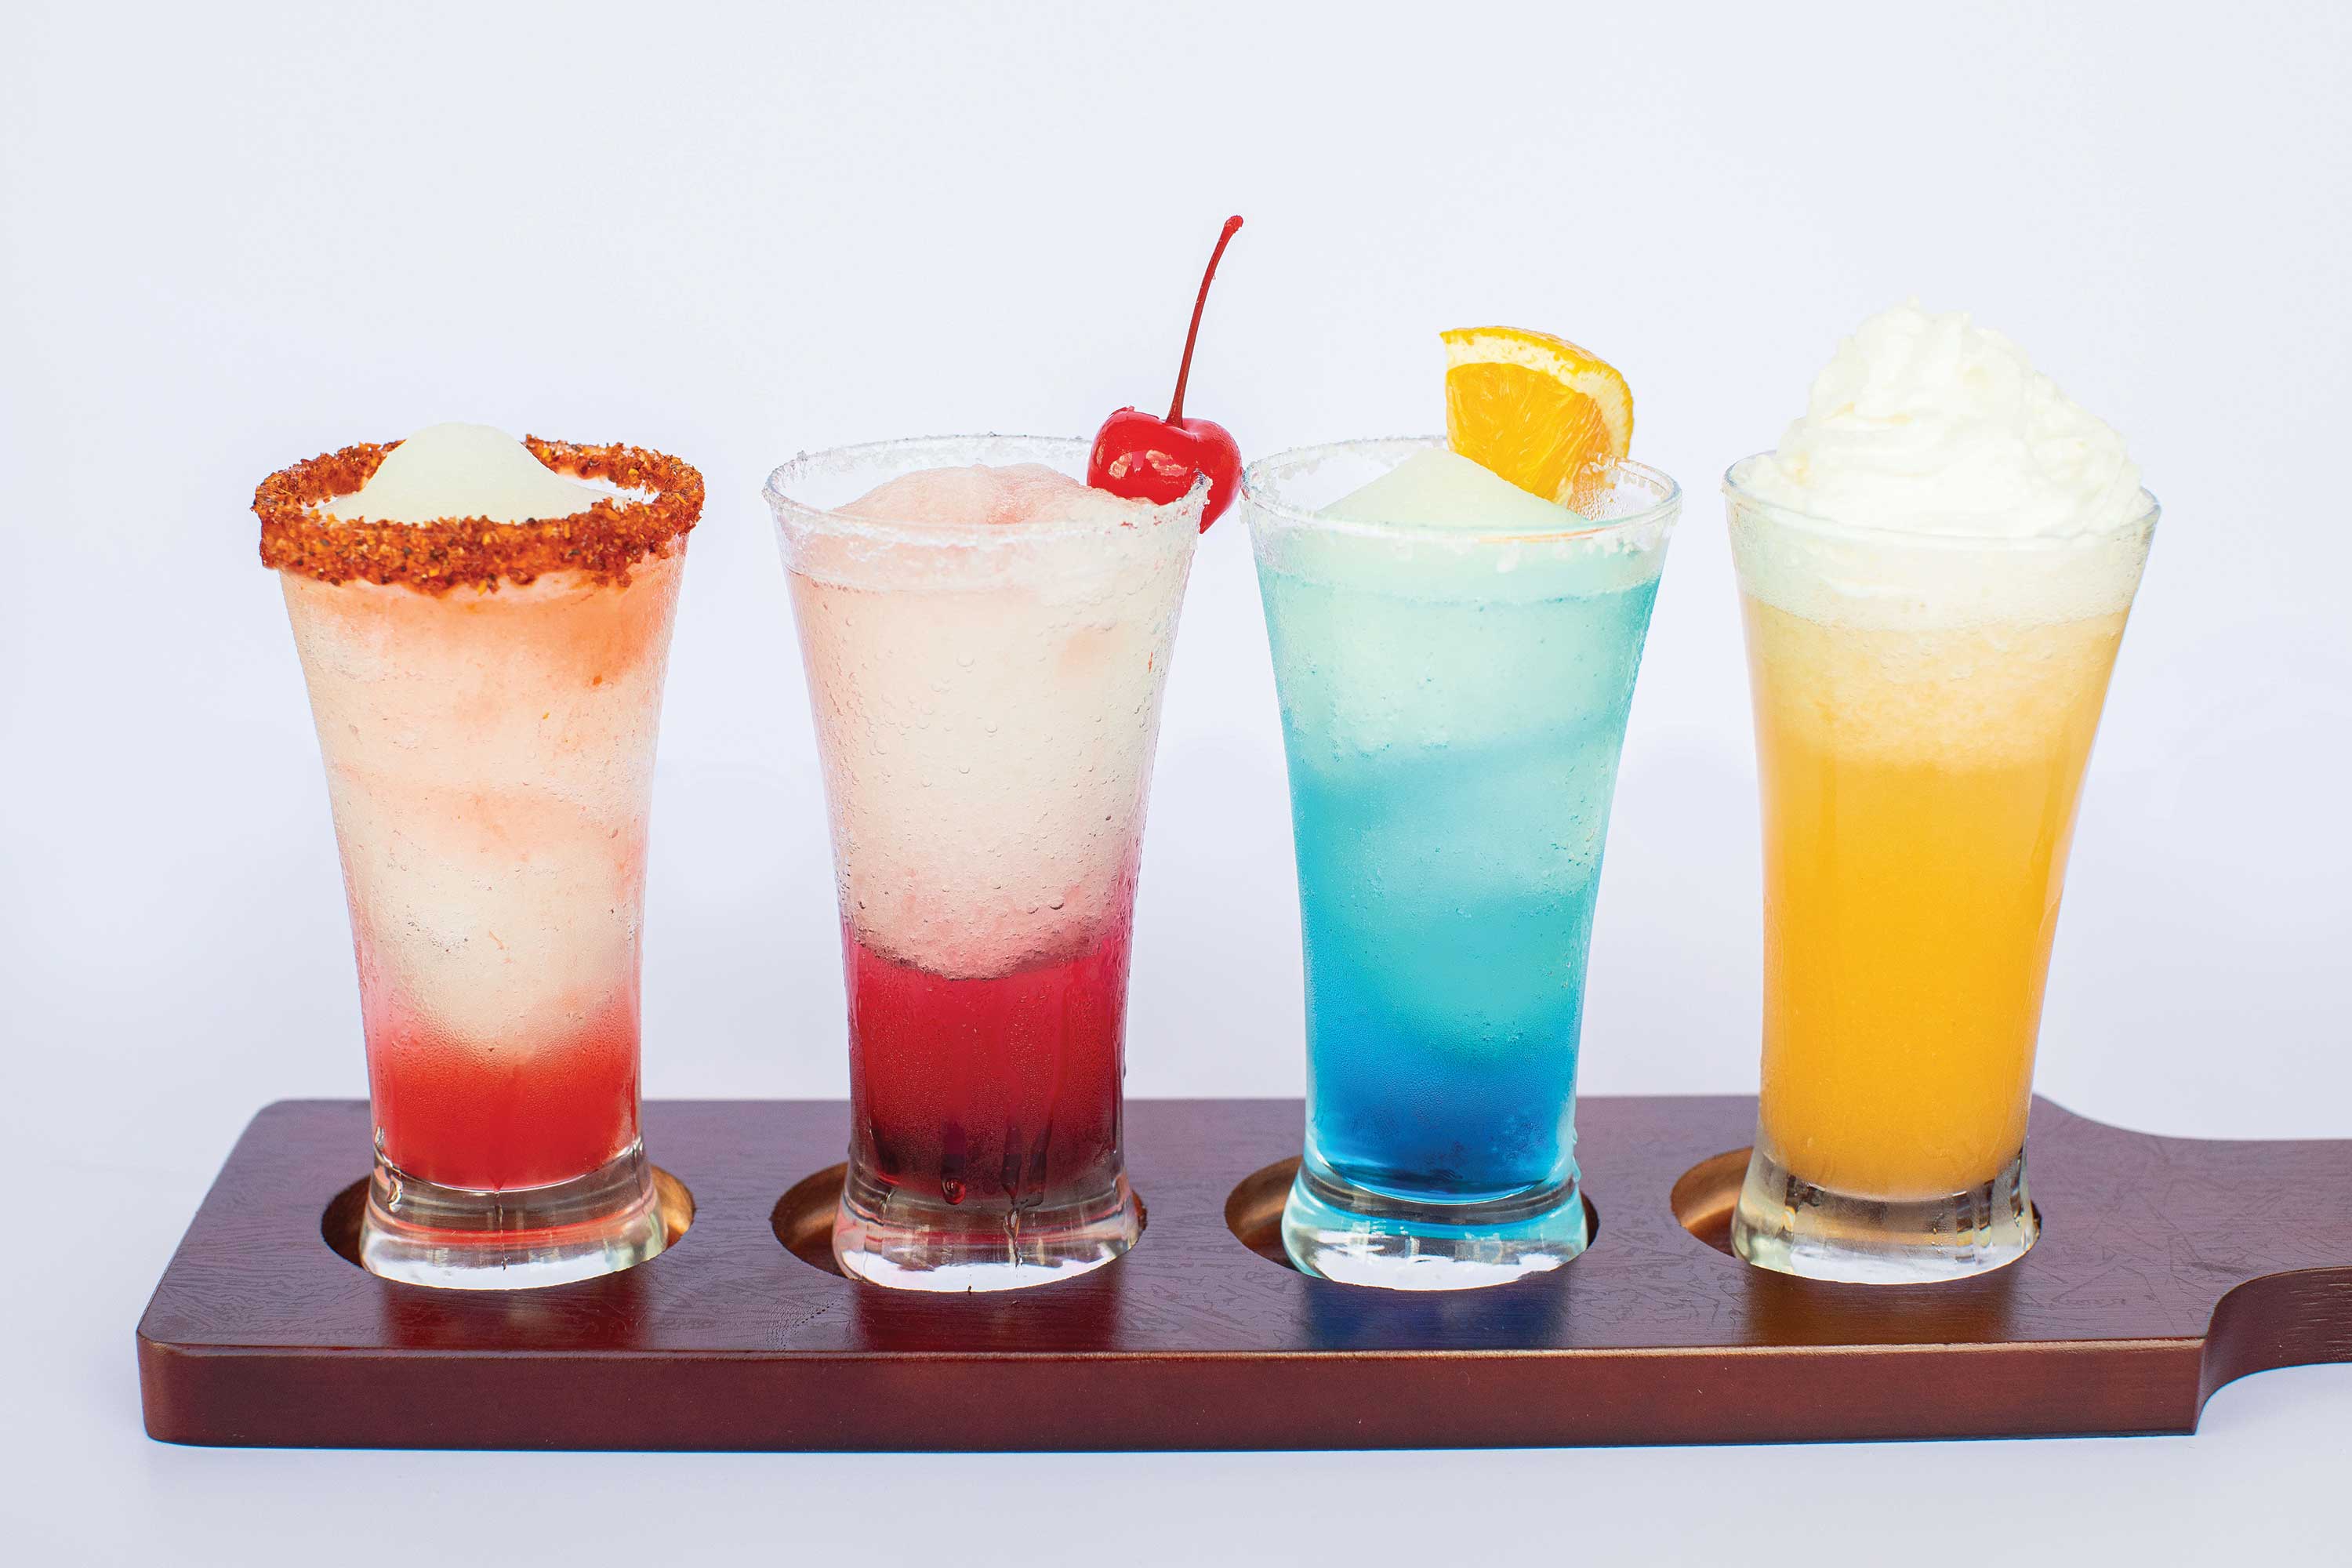 Image: Four glasses of margarita are sitting on a wooden serving platter. The first is dark pink with a salt and spice rim. The second is red with a cherry on top. The third is blue with an orange slice. The last is golden yellow with whipped cream on top.